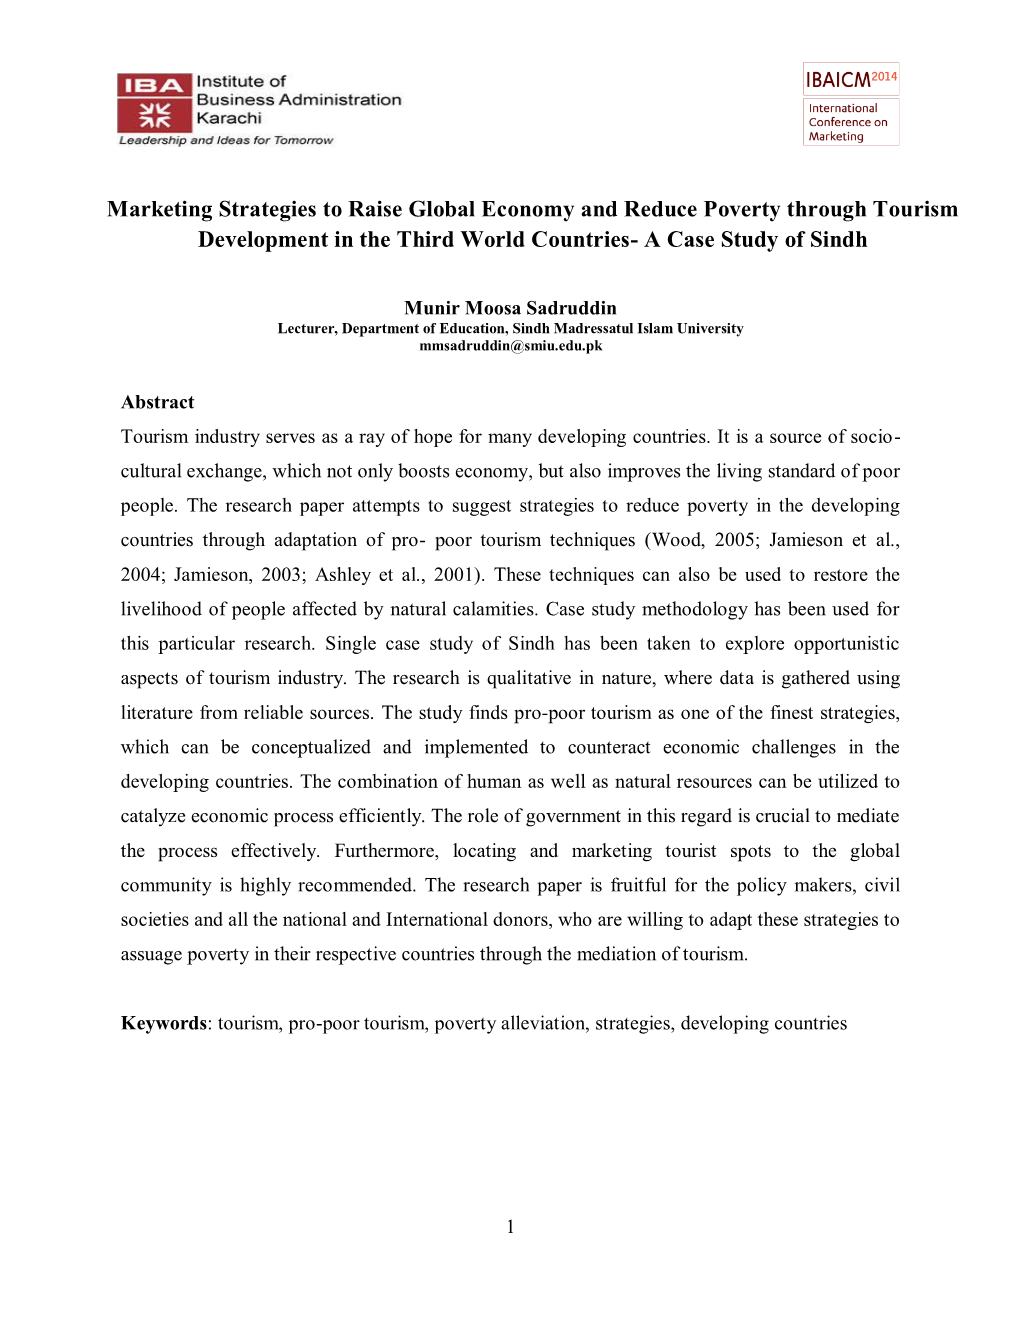 Marketing Strategies to Raise Global Economy and Reduce Poverty Through Tourism Development in the Third World Countries- a Case Study of Sindh